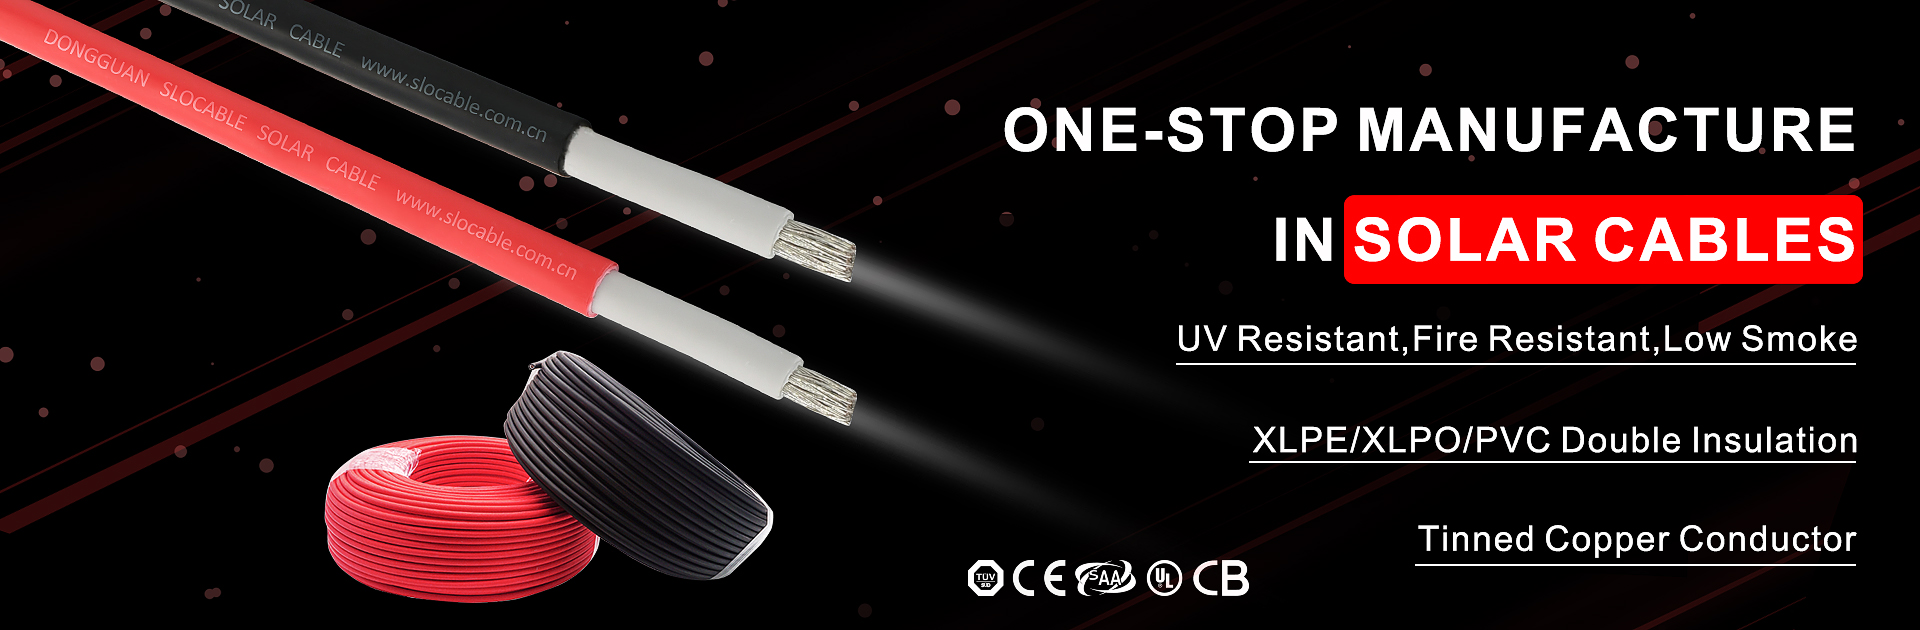 slocable oorun pv USB asia